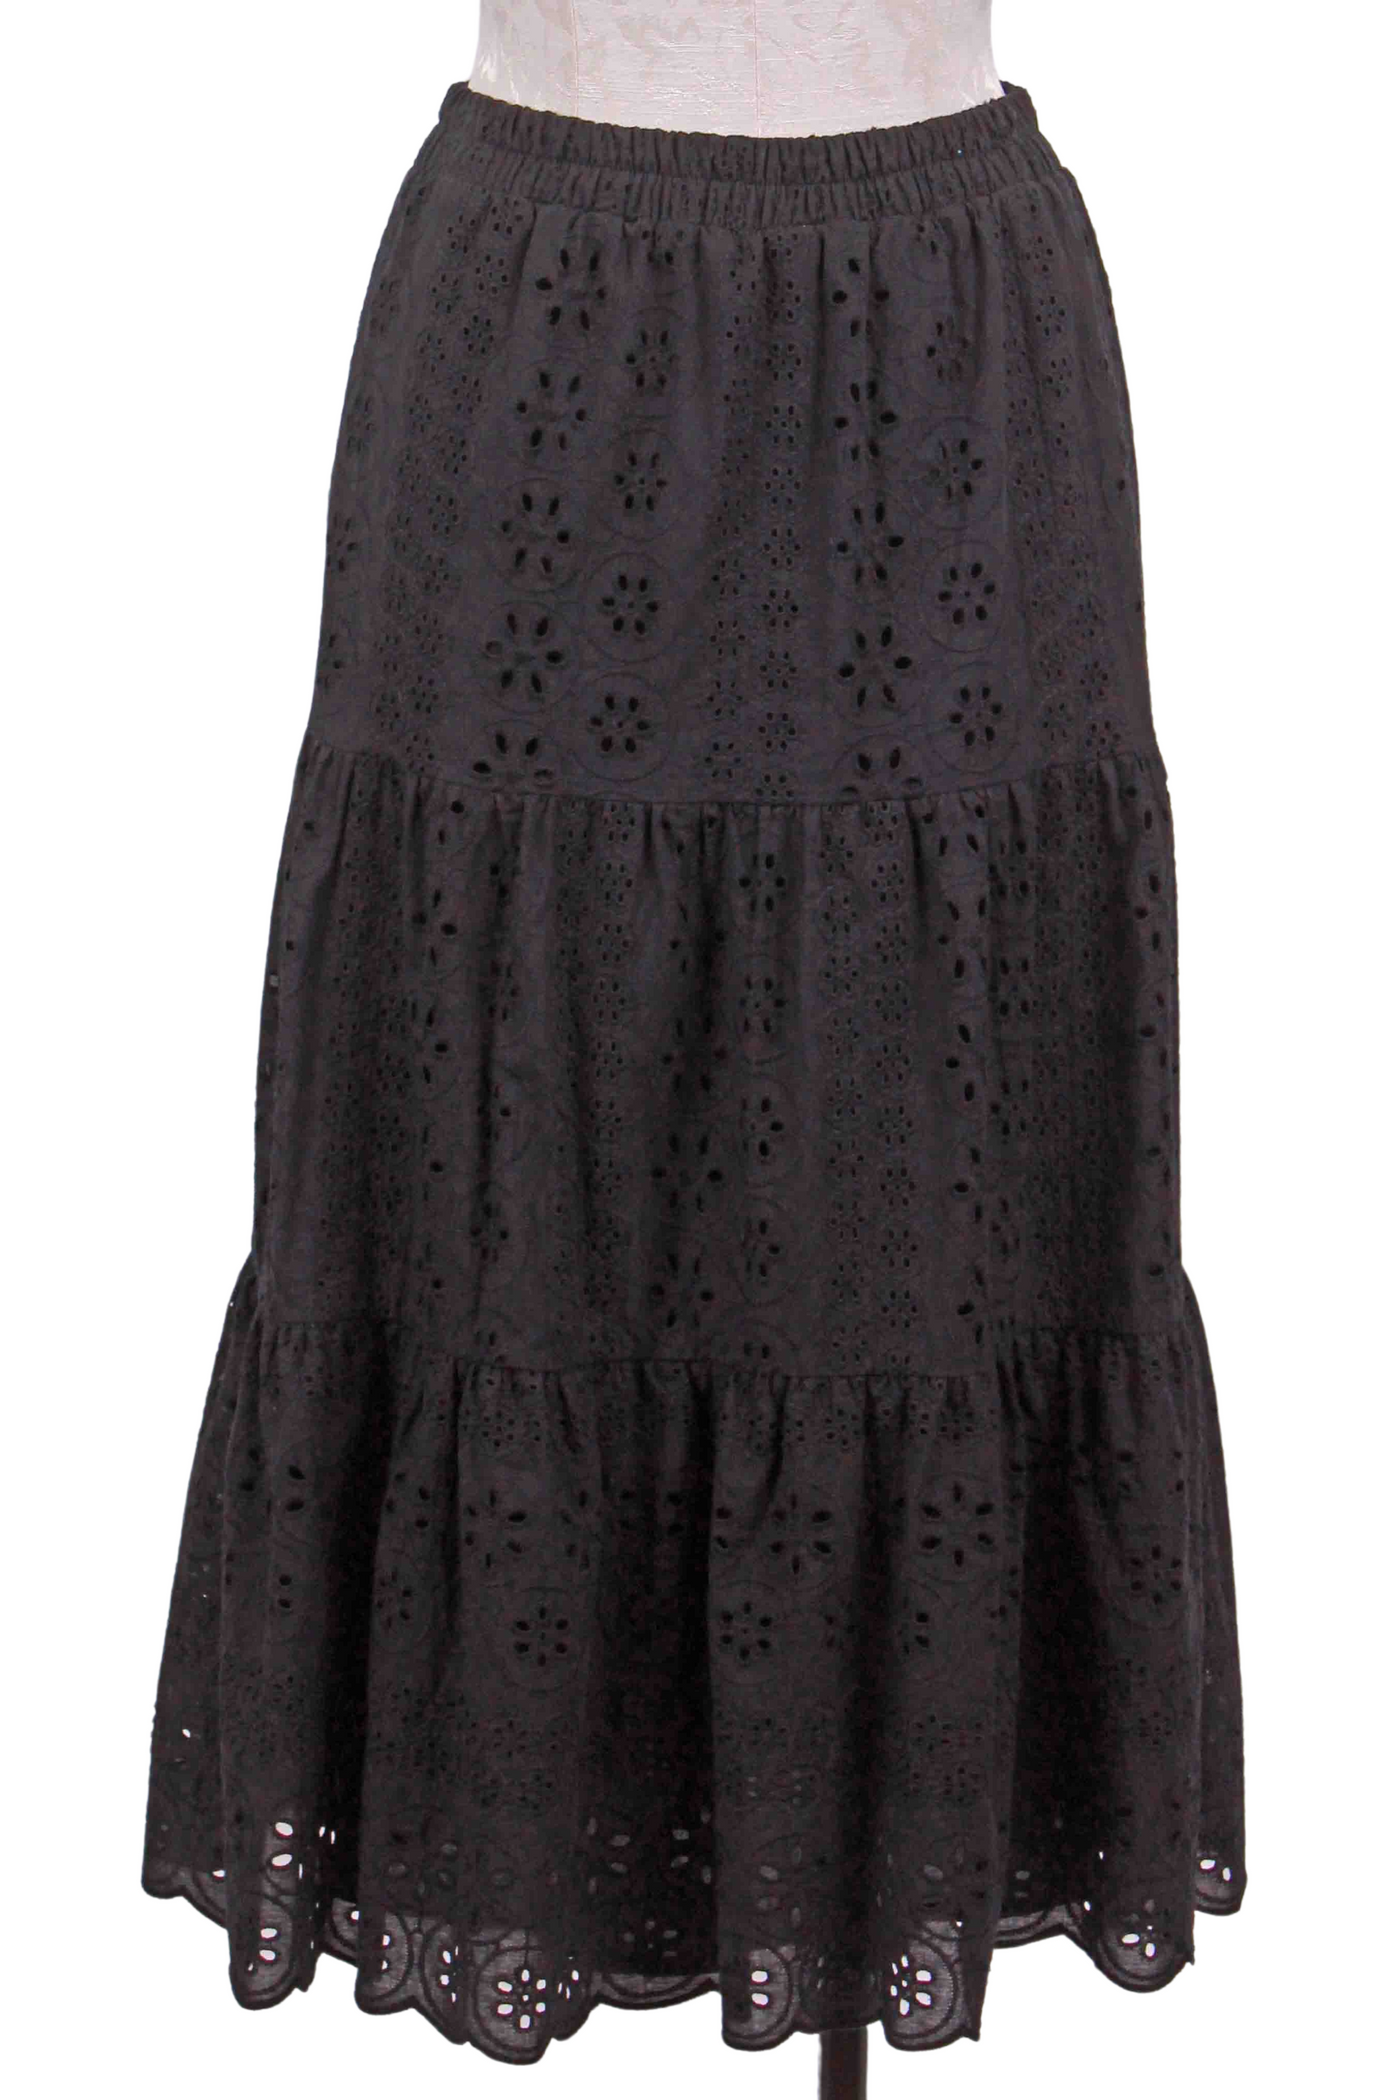 black Tiered Eyelet Midi Length Skirt by Apricot with an elastic waist